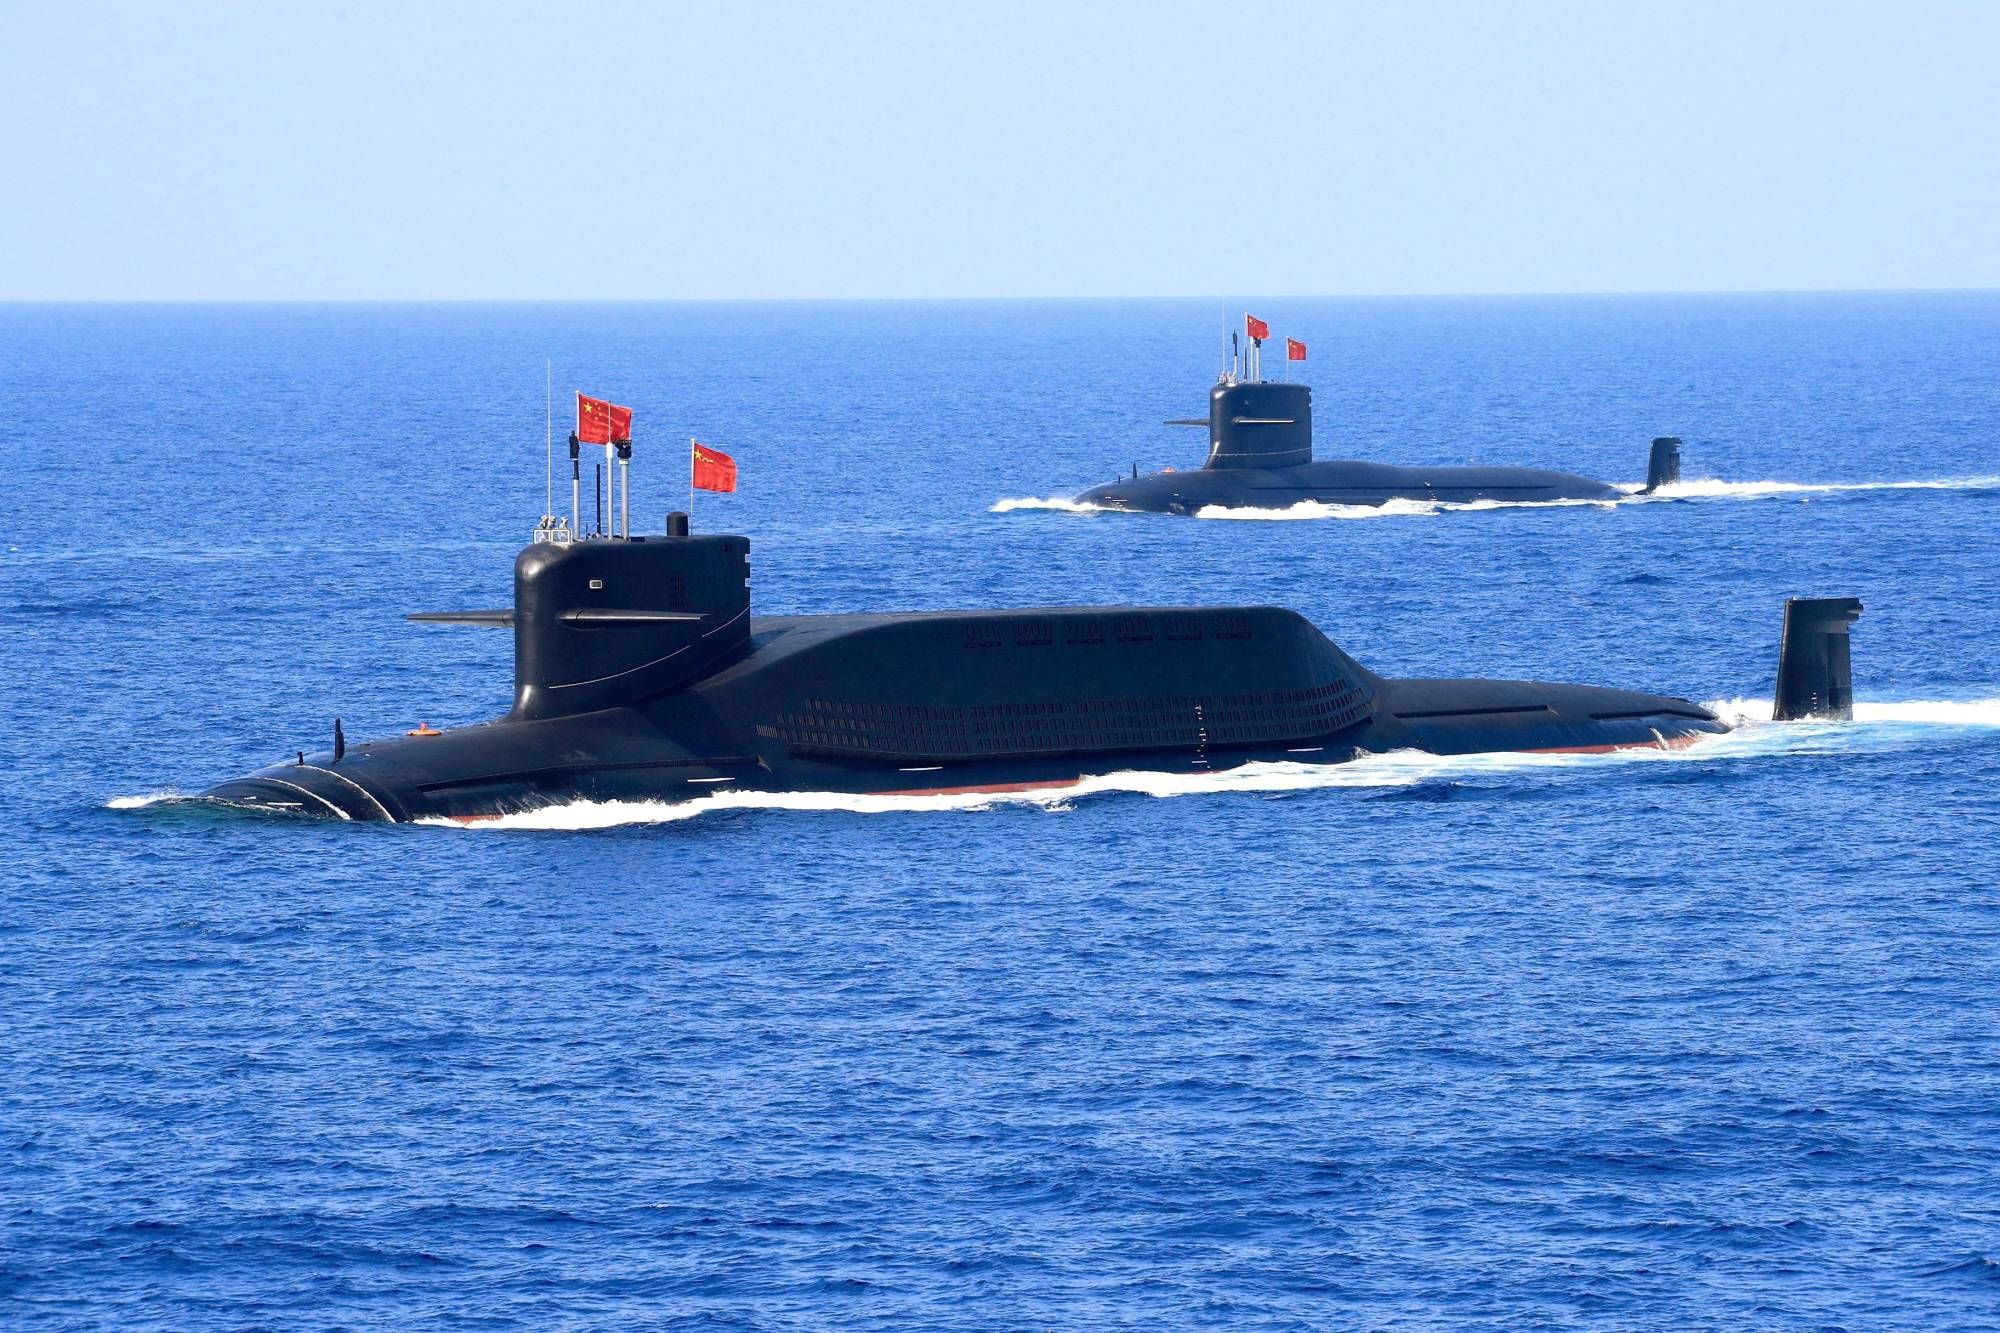 China's intensifying nucleararmed submarine patrols add complexity for